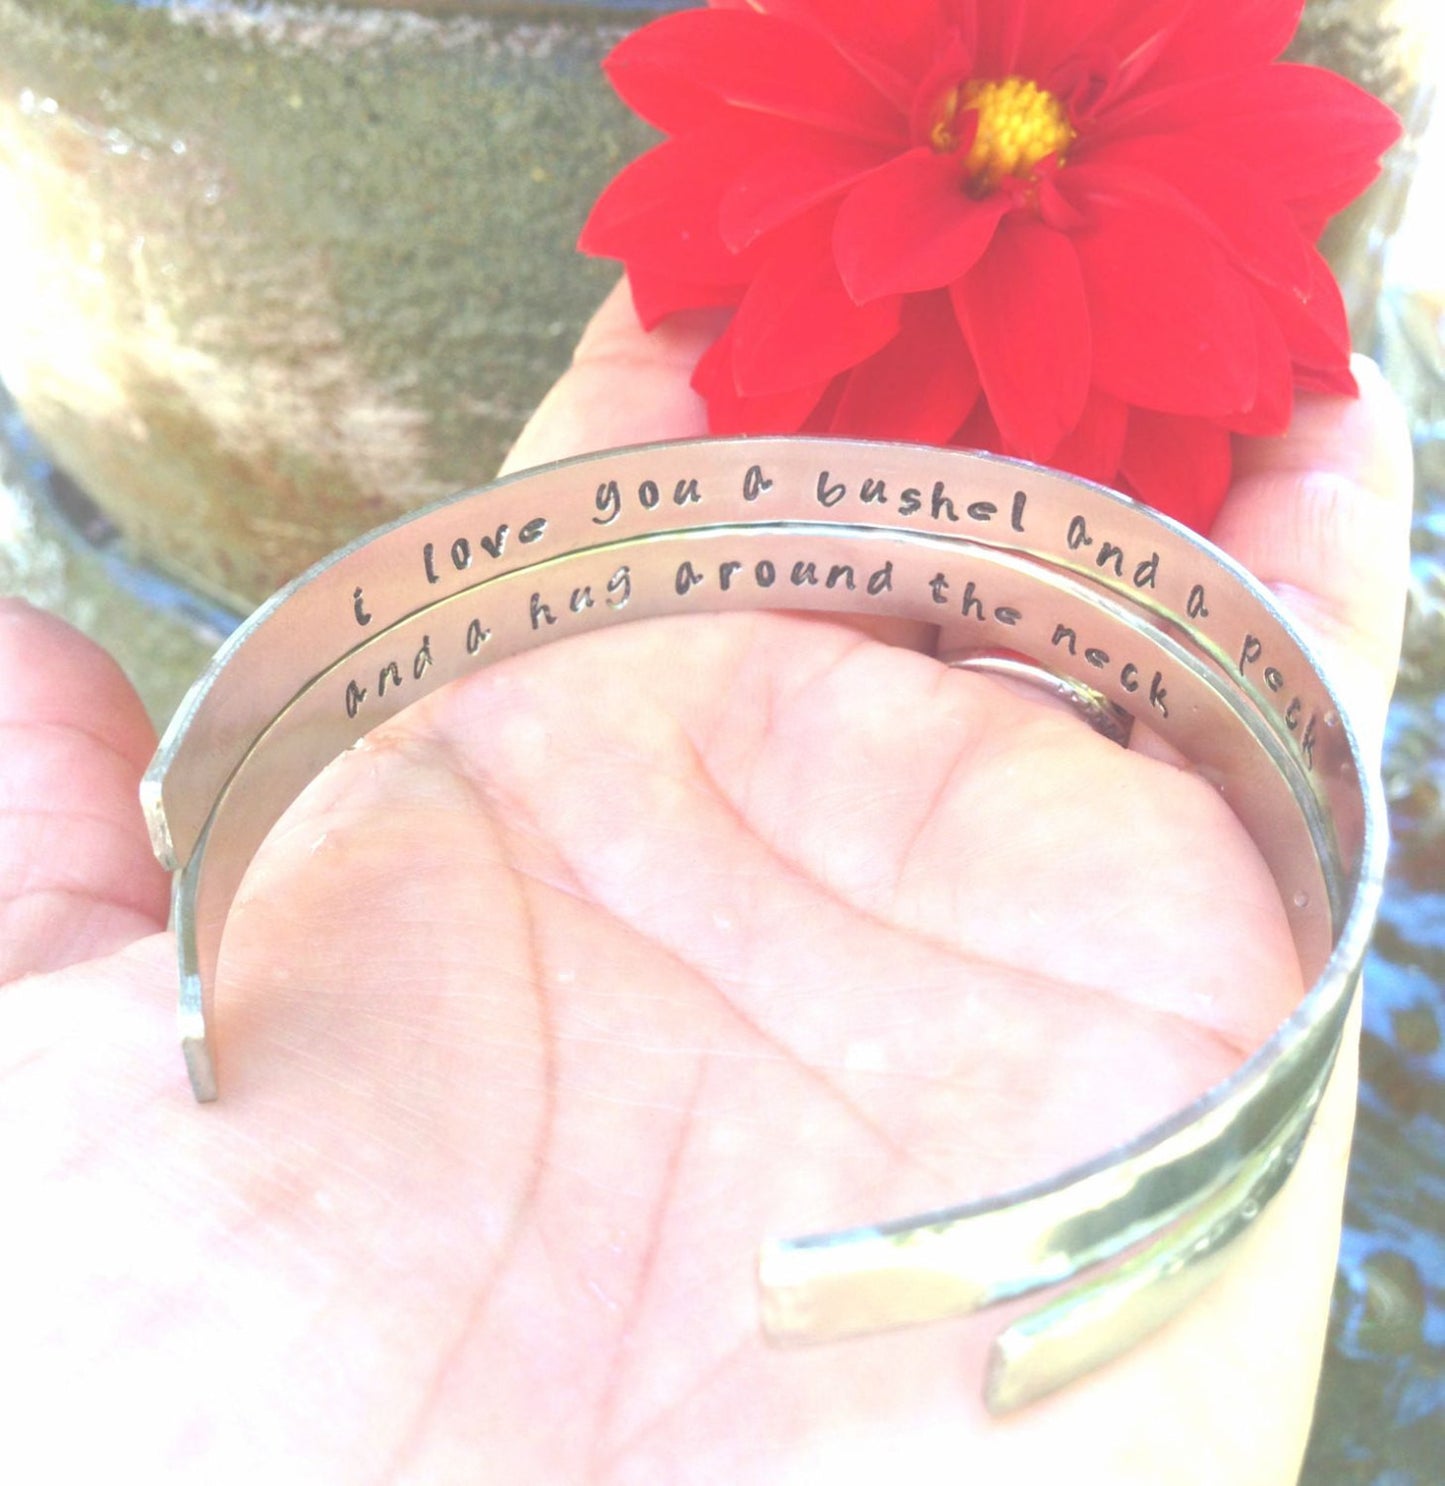 cuff, bracelet, personalized bracelets, i love you a bushel and a peck and a hug around the neck, mother daughter bracelet, quote bracelet - Natashaaloha, jewelry, bracelets, necklace, keychains, fishing lures, gifts for men, charms, personalized, 